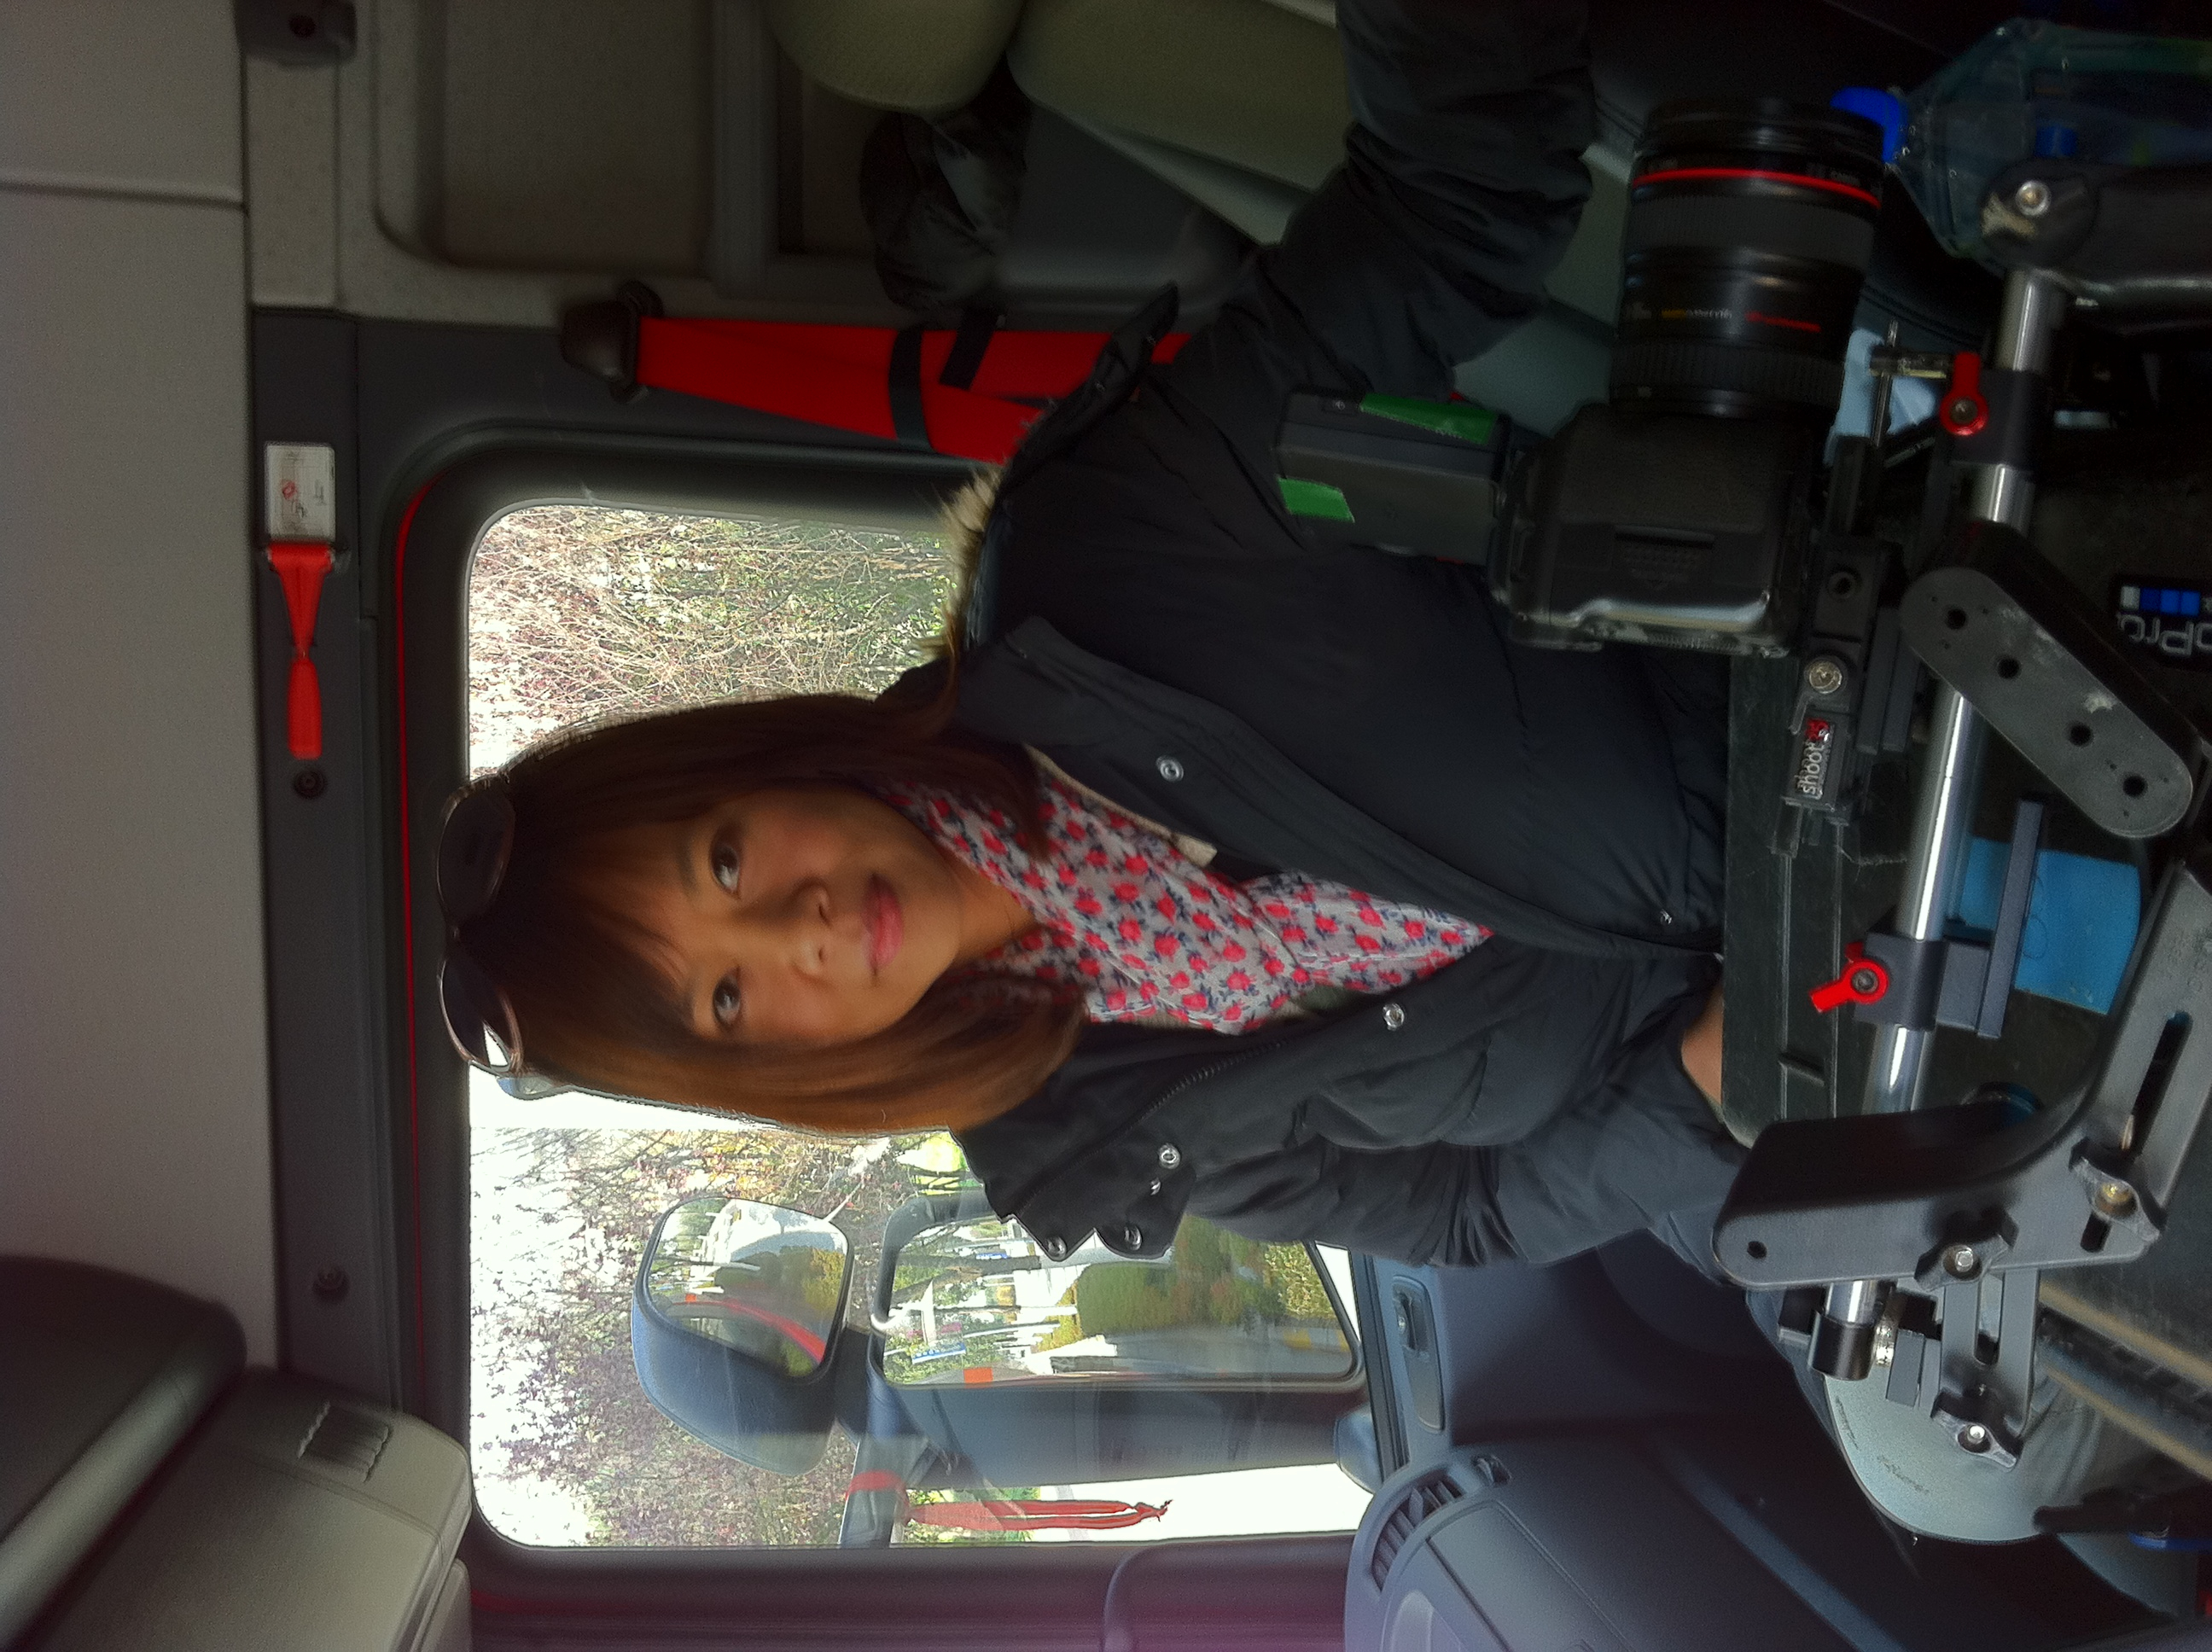 Gina Wong on location in Shanghai - The Journey to the South (85min, China) to be released in 2014